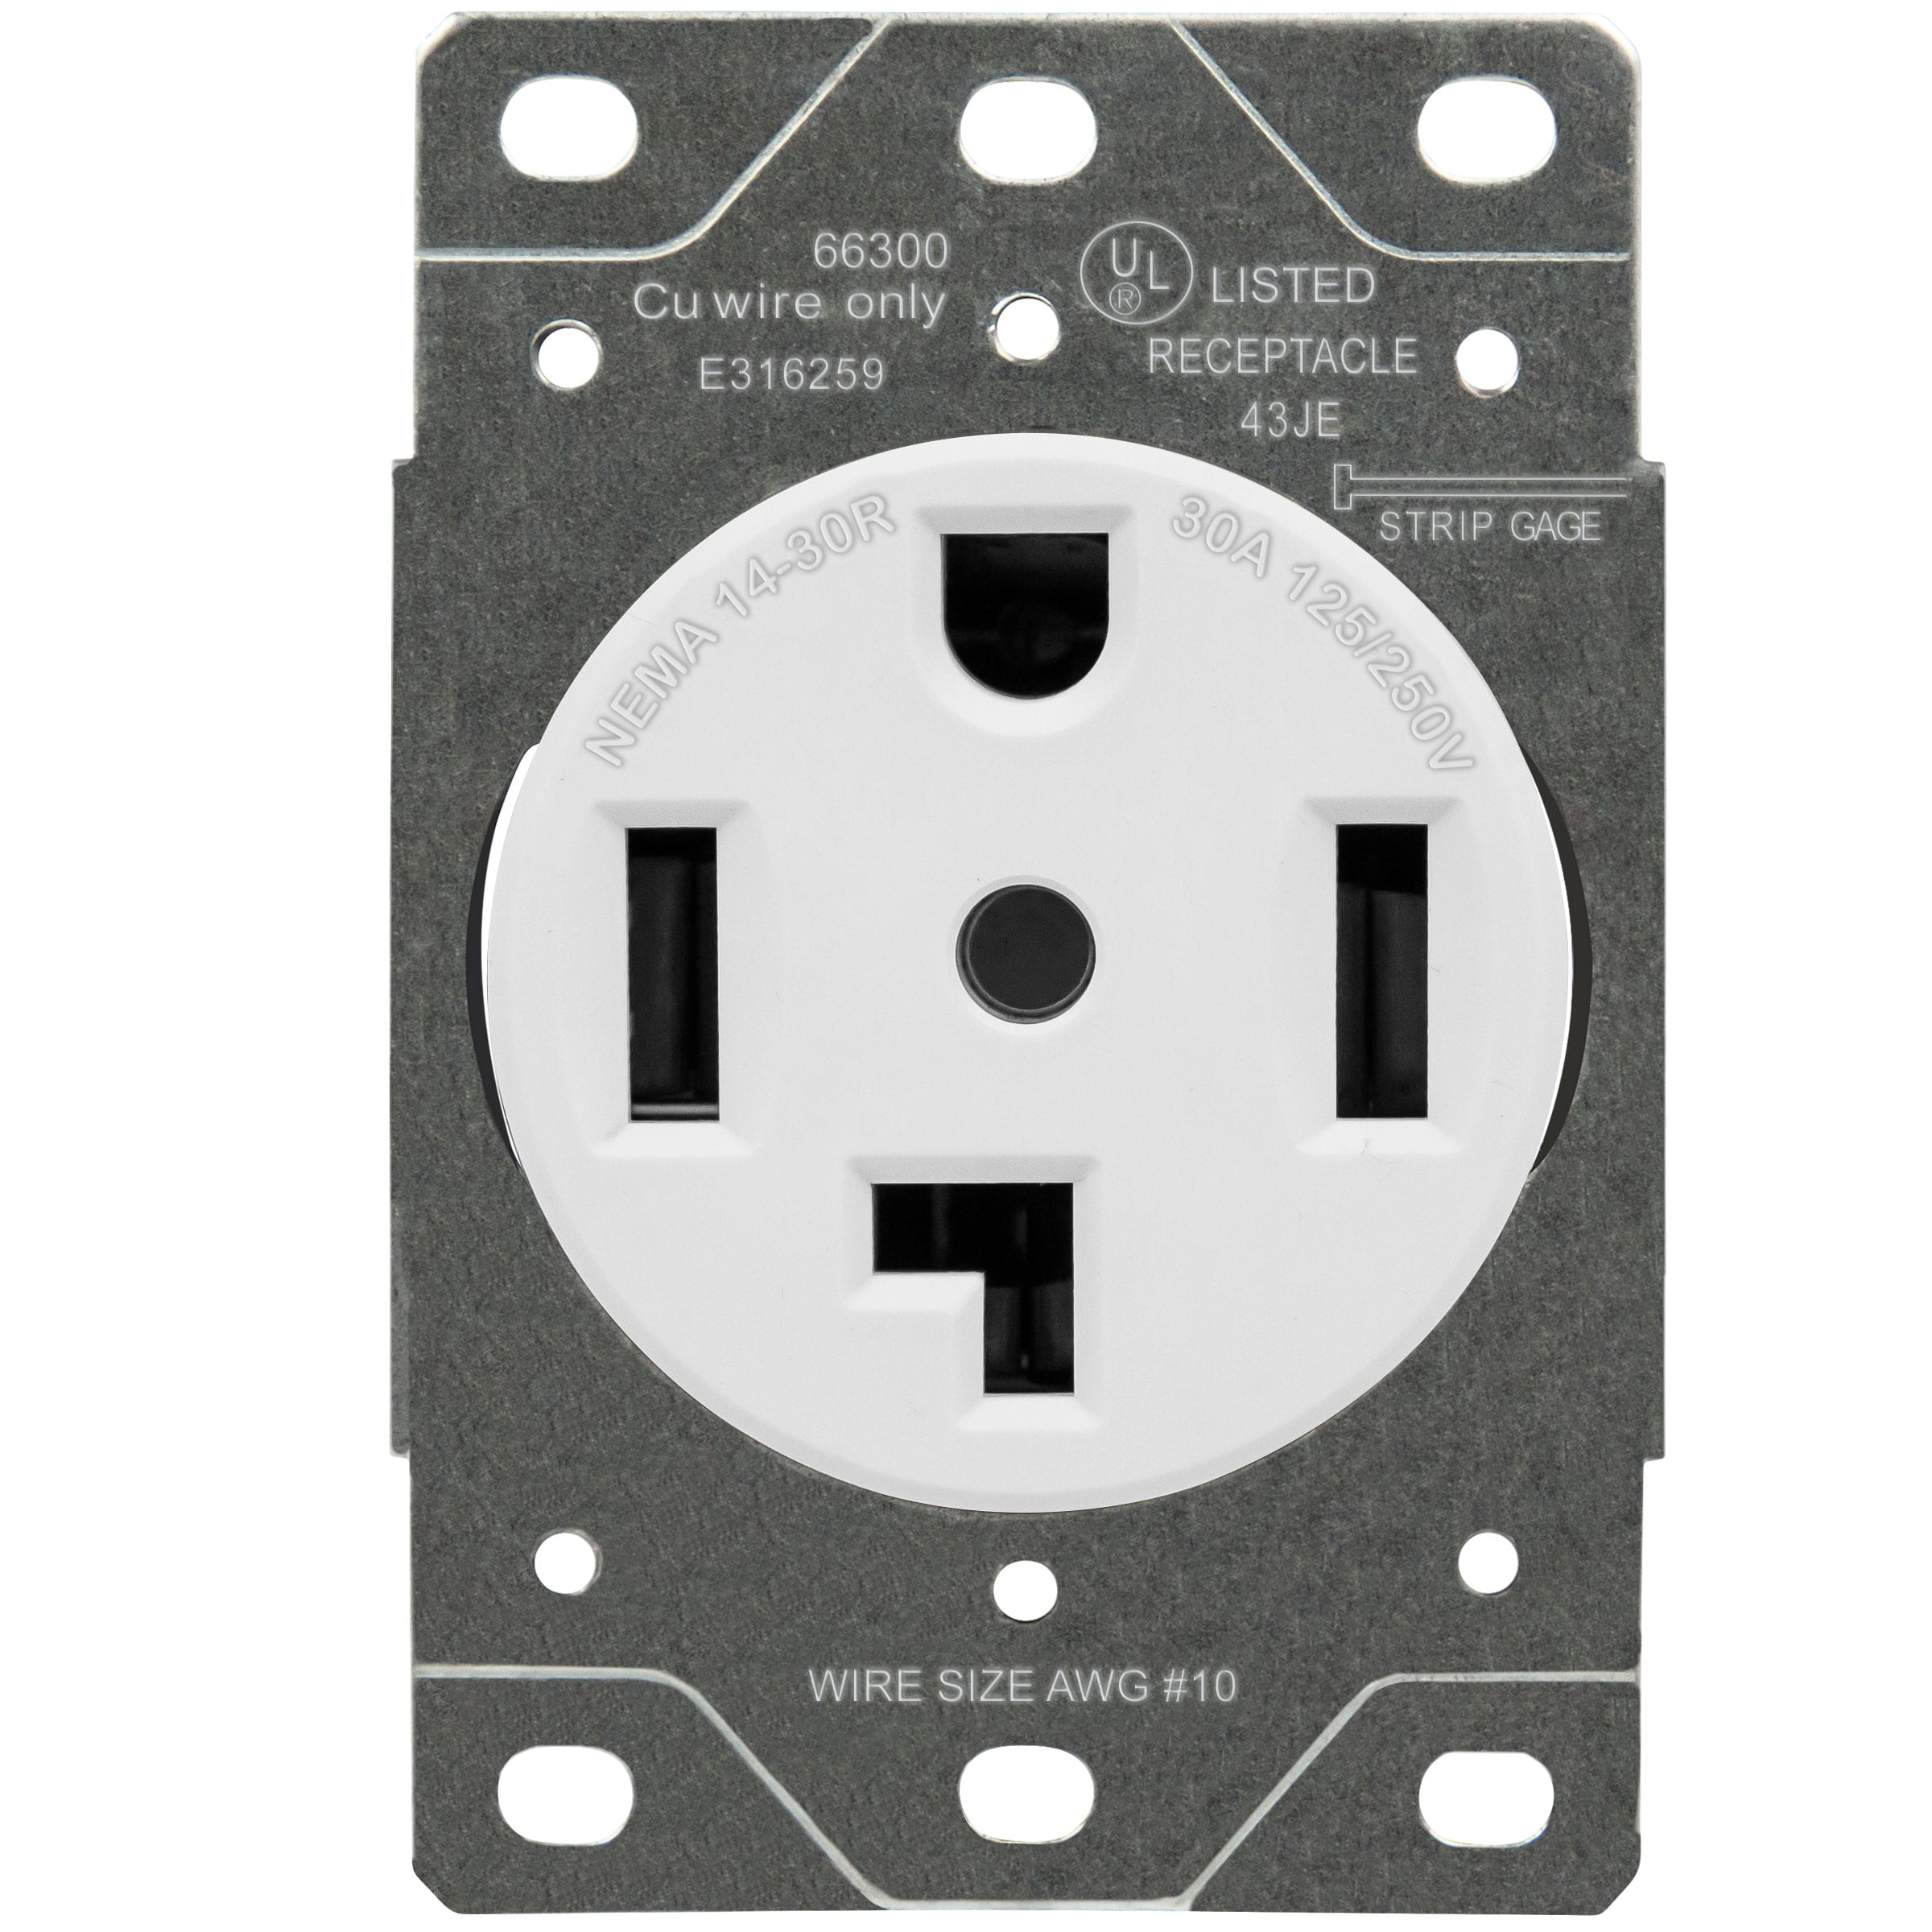 2-Gang 3 Holes 0.50” Each ENERLITES Weatherproof Outlet Box with Three 1/2-in Threaded Outlets 4.5” Height x 4.5” Length x 2.82” Depth EN2350 Outdoor Electrical Box 